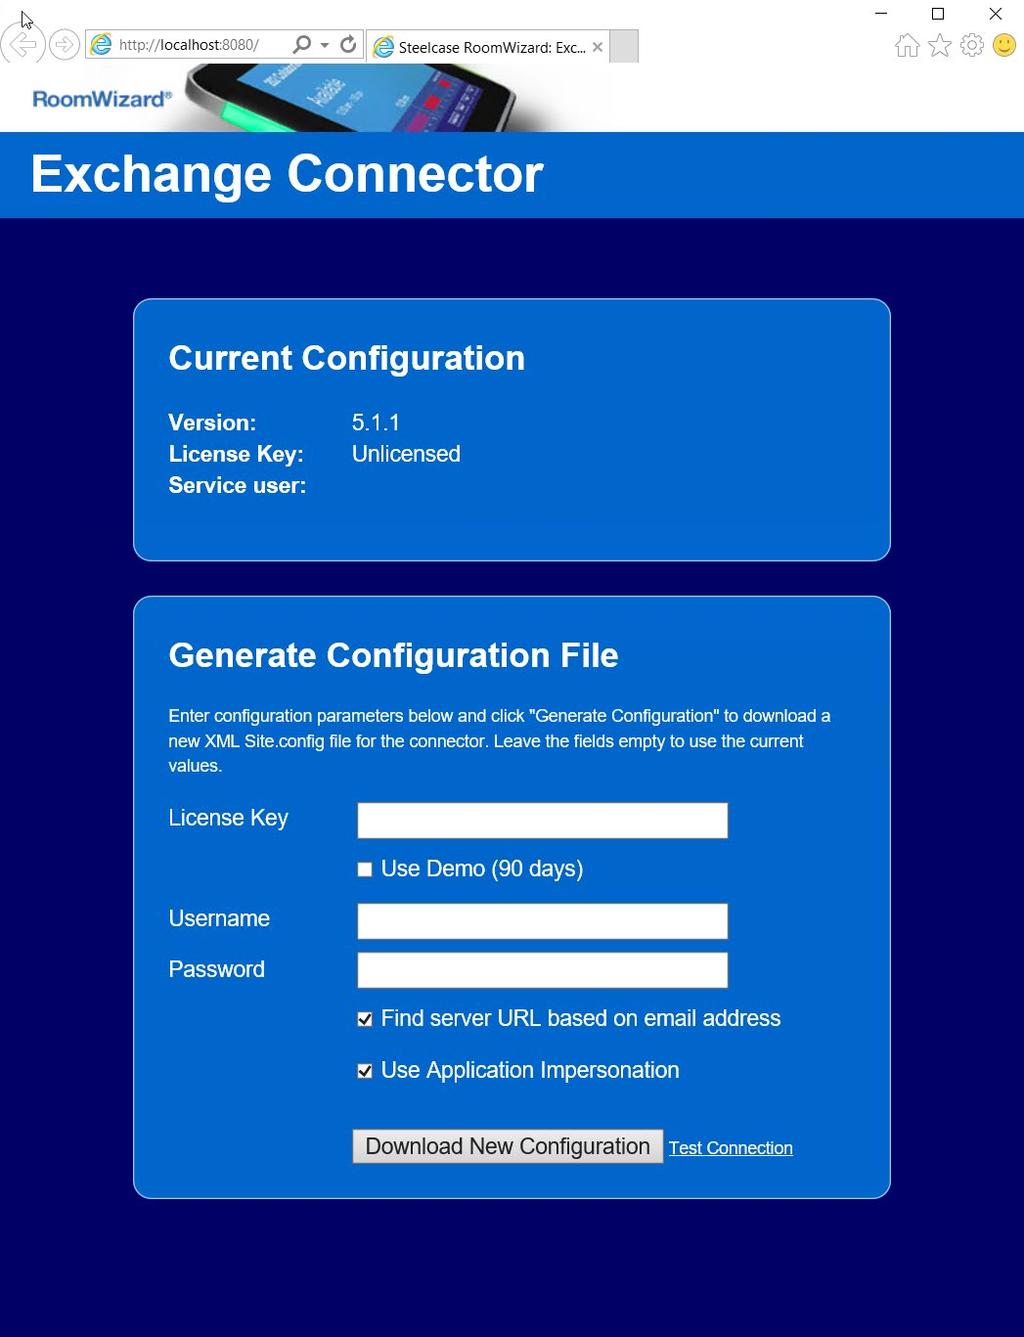 CONFIGURING THE EXCHANGE CONNECTOR O365 Configuration The Exchange Connector needs three pieces of information to operate: License key or a 90-day Use Demo Username (email address) for the Exchange